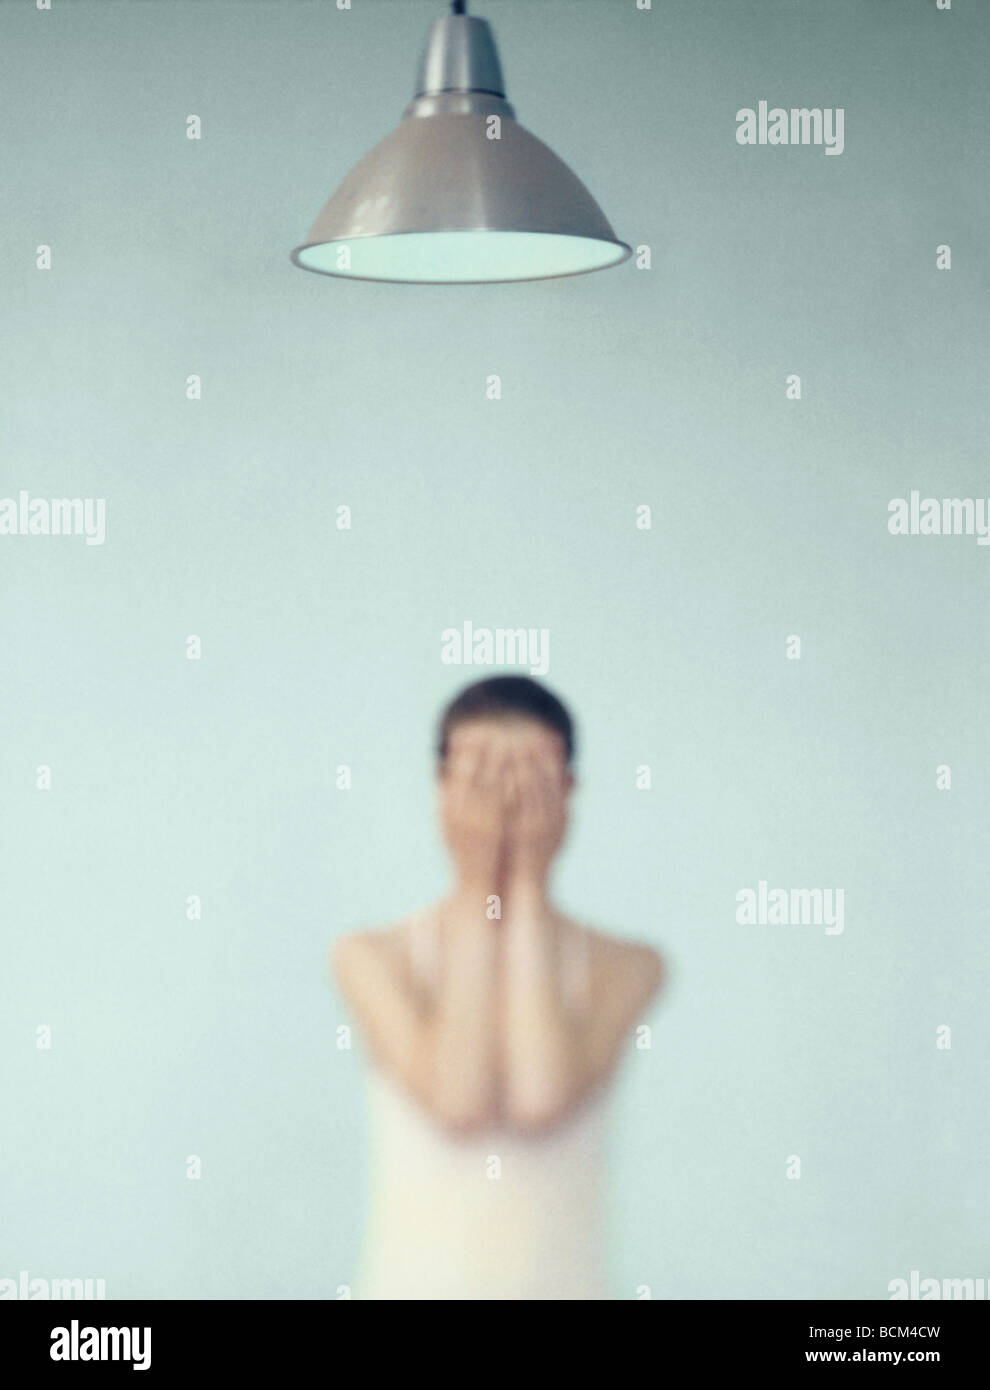 Young woman standing with hands over face, focus on lamp in foreground Stock Photo